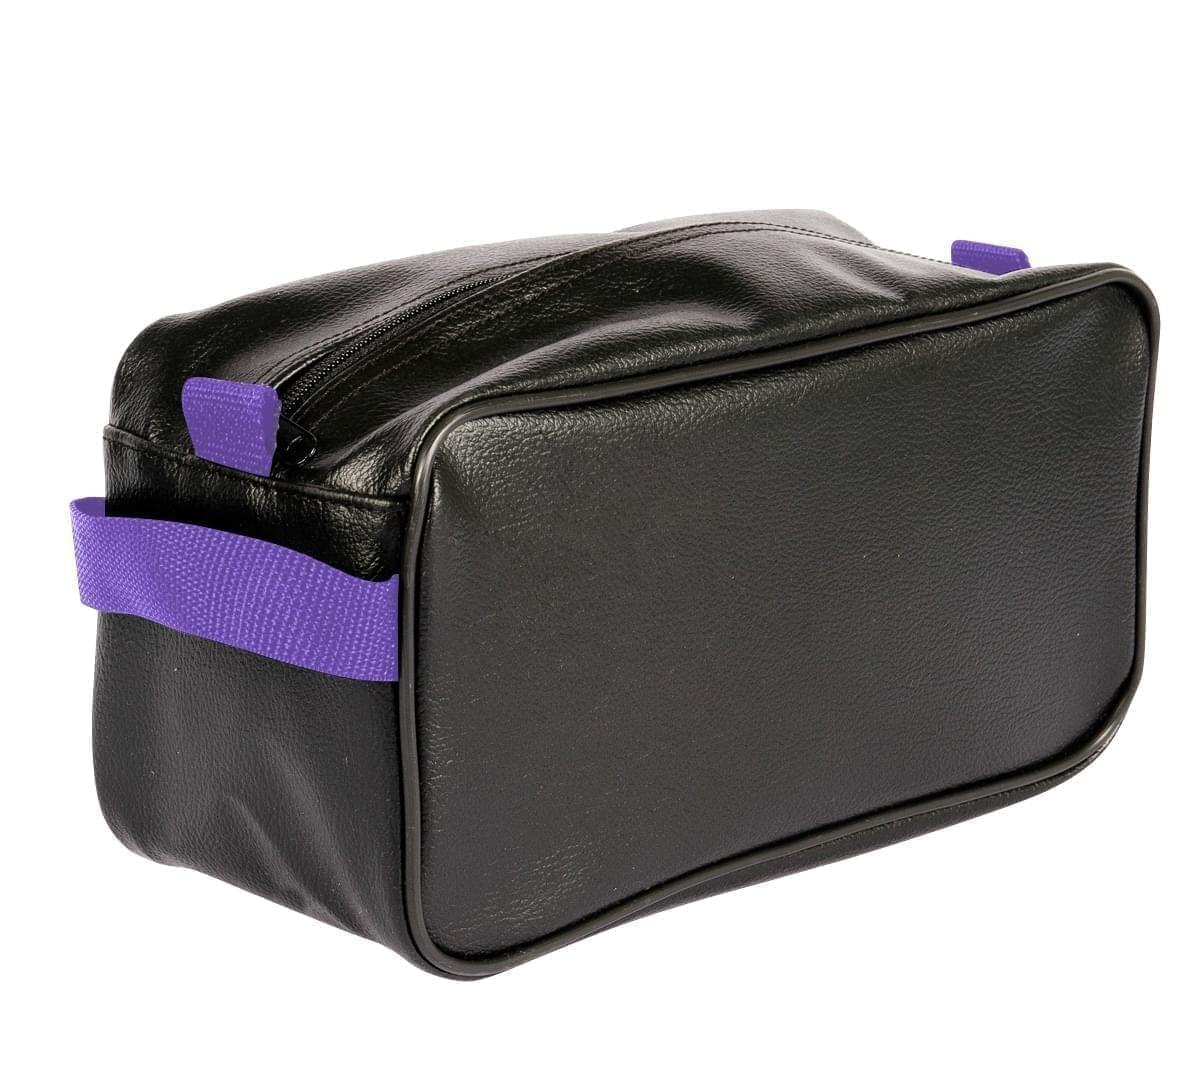 USA Made Cosmetic & Toiletry Cases, Black-Purple, 3000996-AO1